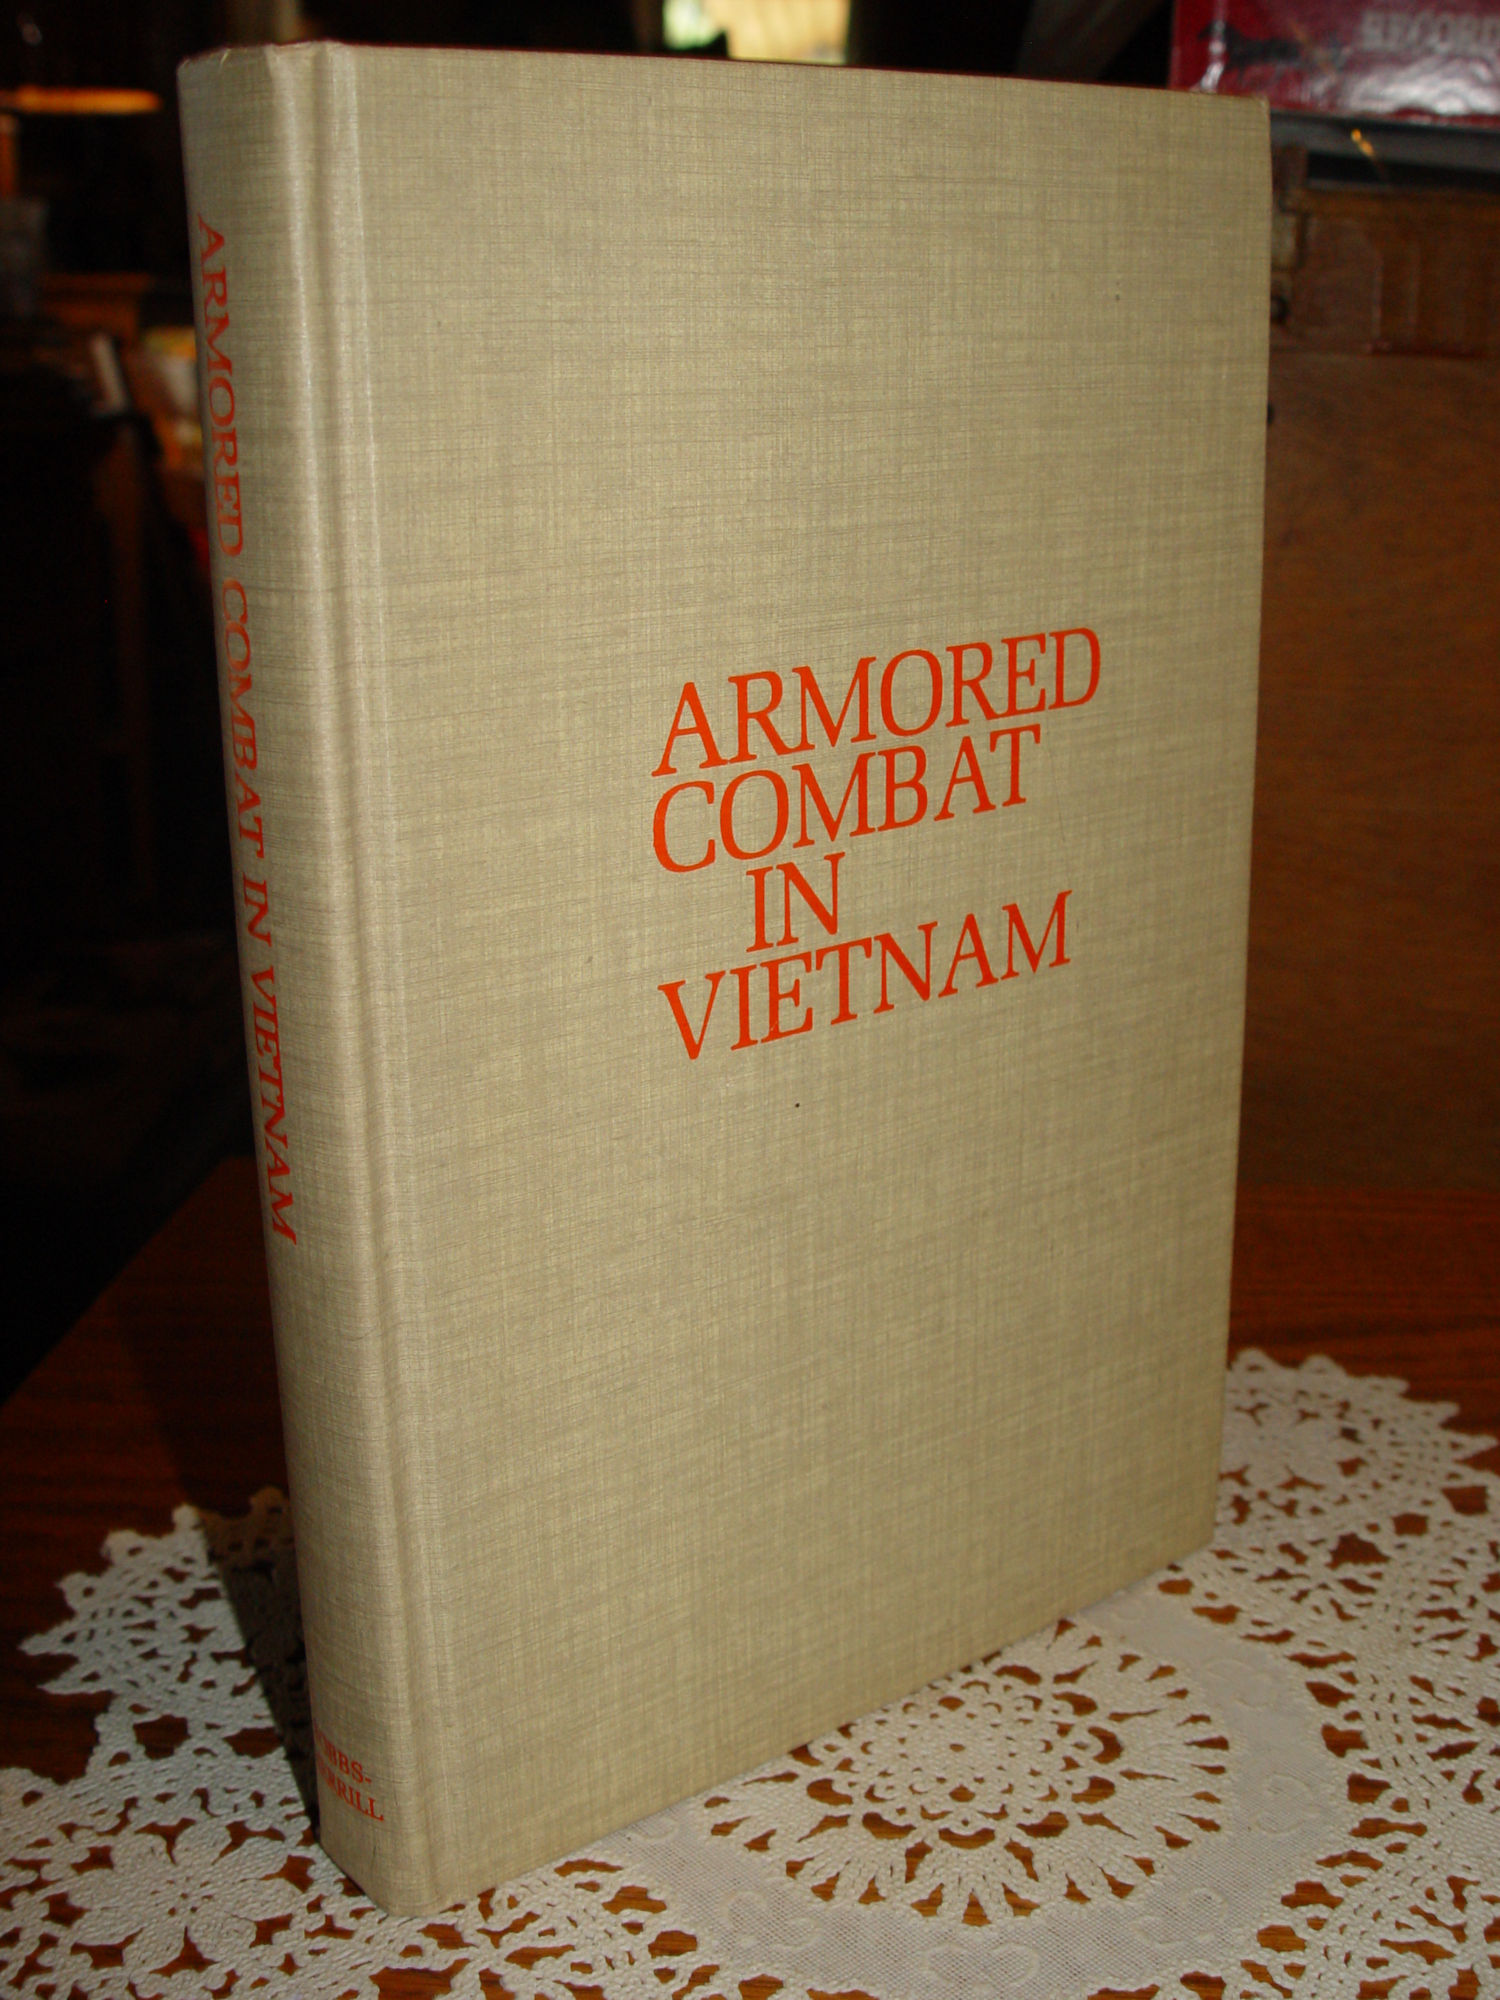 Armored Combat
                        in Vietnam by Donn A. Starry 1980